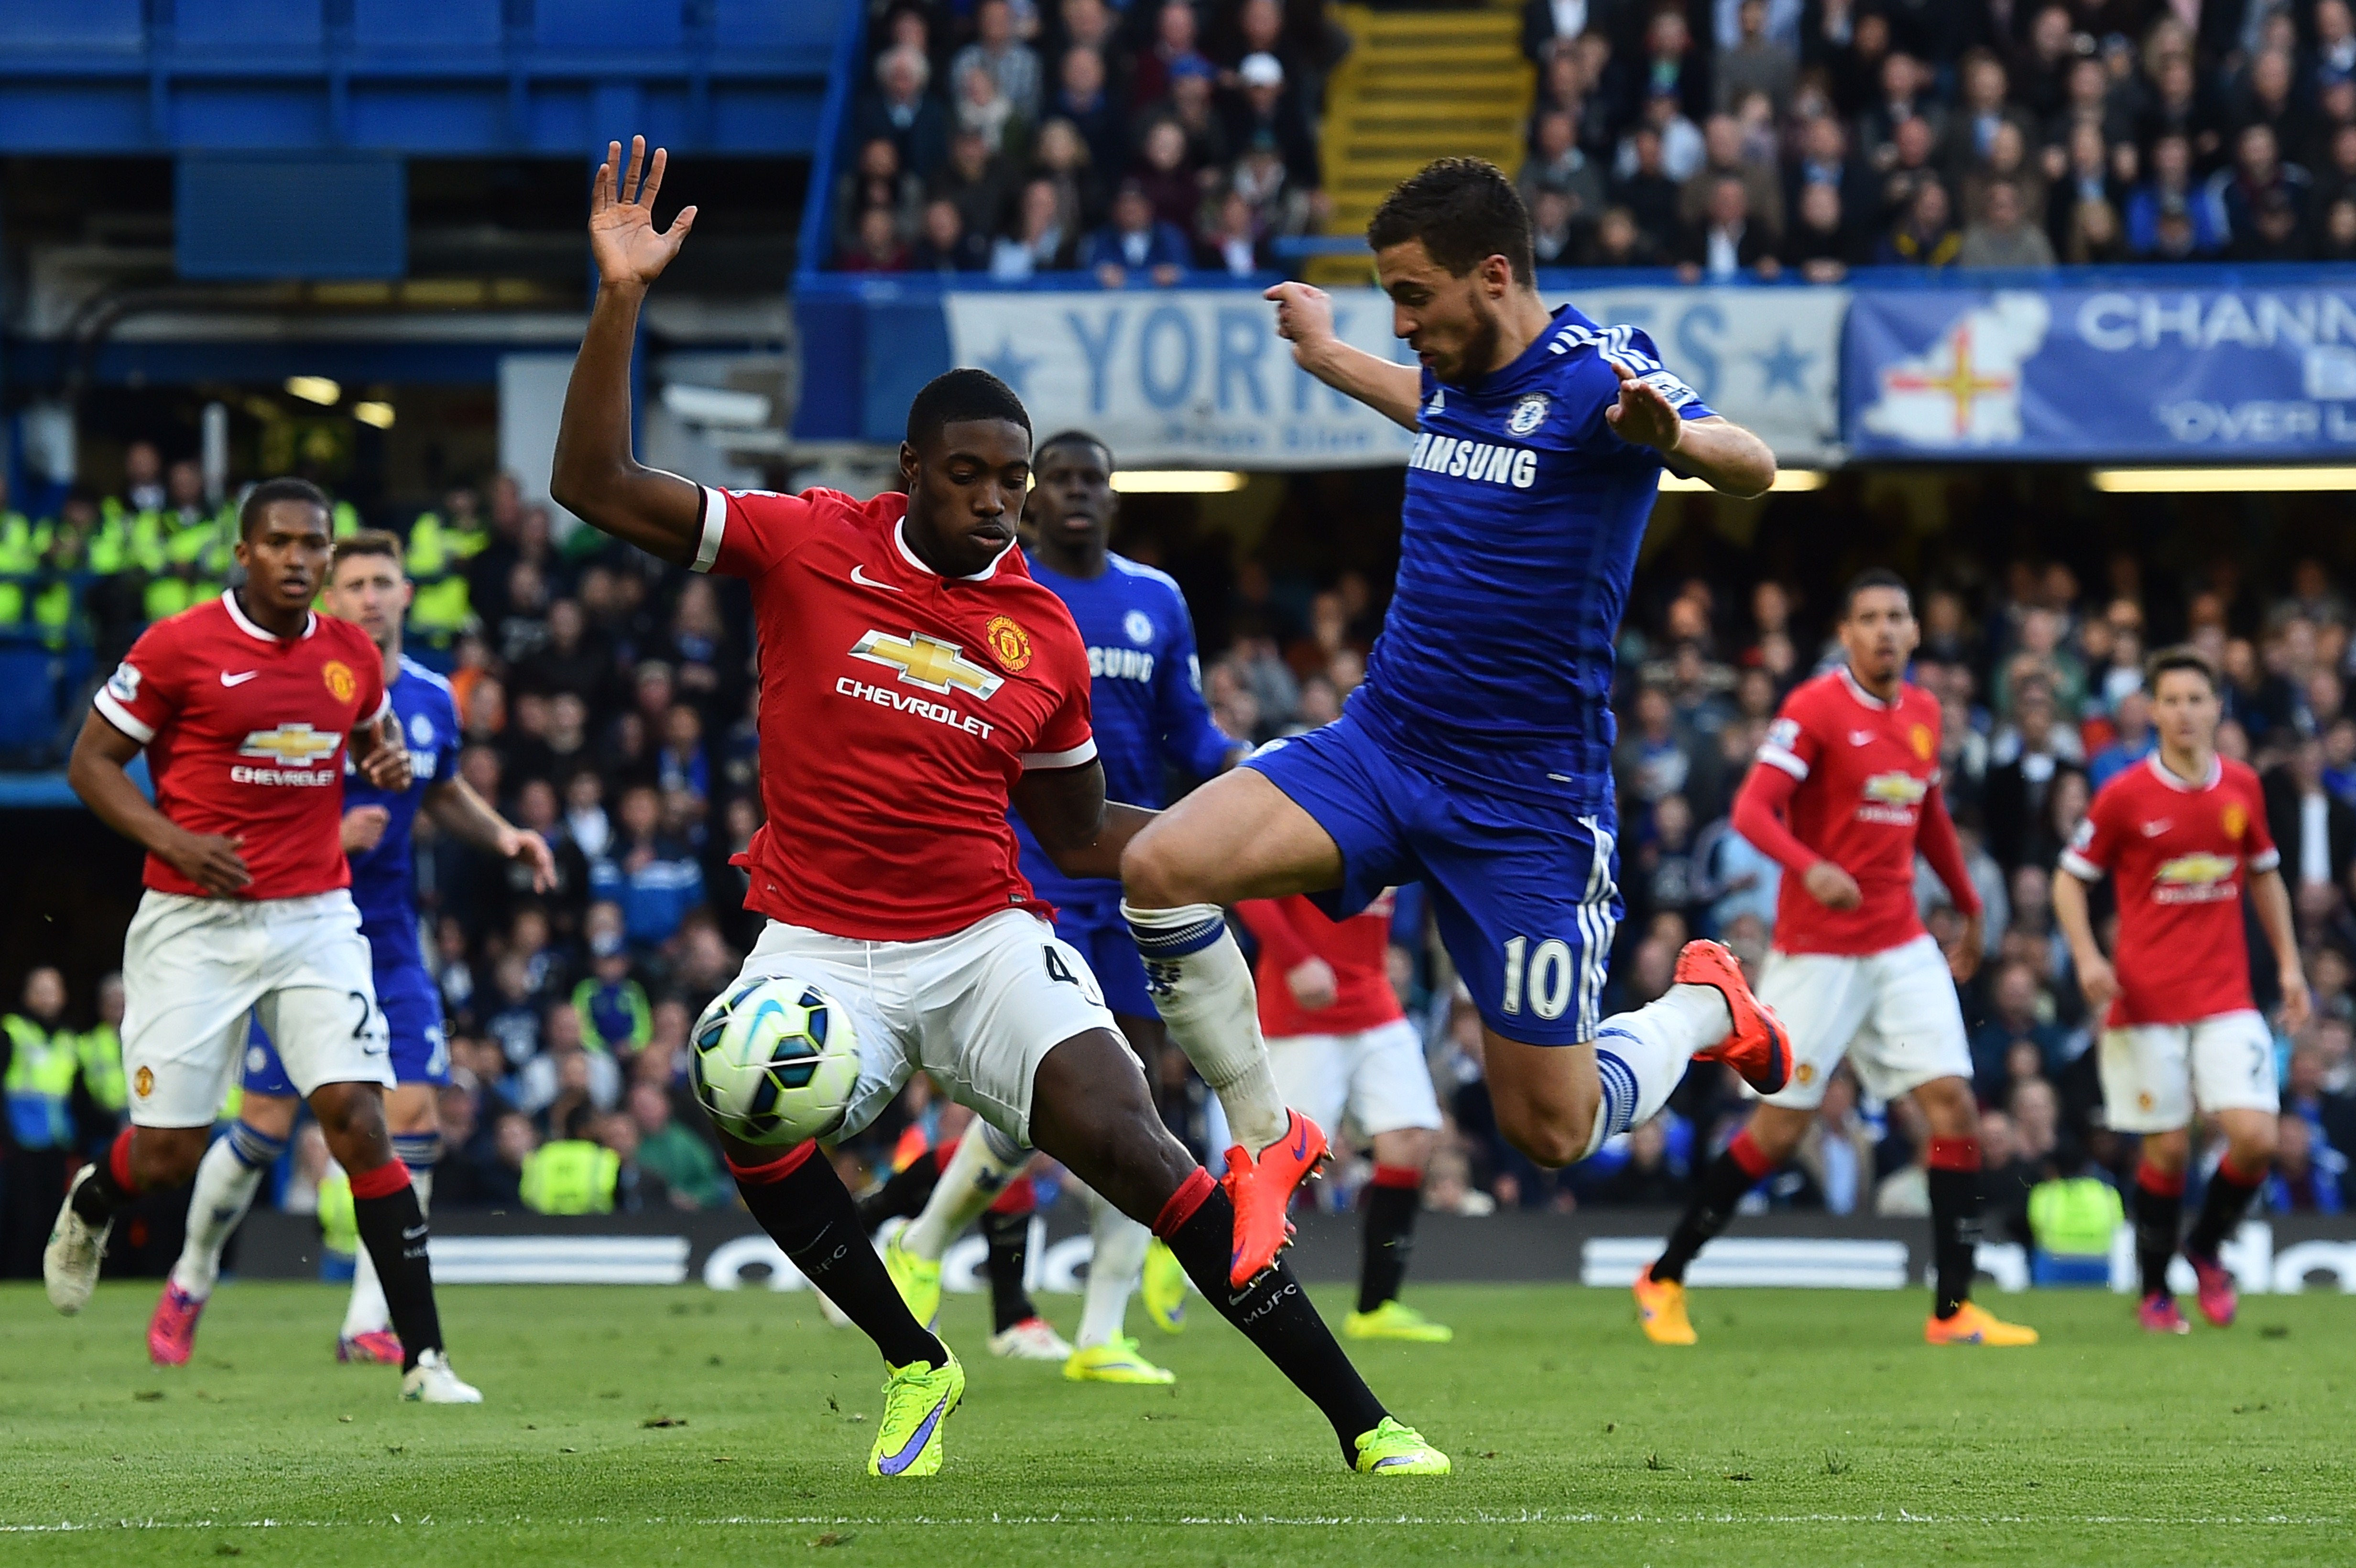 Chelsea's Belgian midfielder Eden Hazard (3R) tries to get past Manchester United's English defender Tyler Blackett (2L) during the English Premier League football match between Chelsea and Manchester United at Stamford Bridge in London on April 18, 2015. AFP PHOTO / BEN STANSALL

RESTRICTED TO EDITORIAL USE. No use with unauthorized audio, video, data, fixture lists, club/league logos or live services. Online in-match use limited to 45 images, no video emulation. No use in betting, games or single club/league/player publications.        (Photo credit should read BEN STANSALL/AFP/Getty Images)